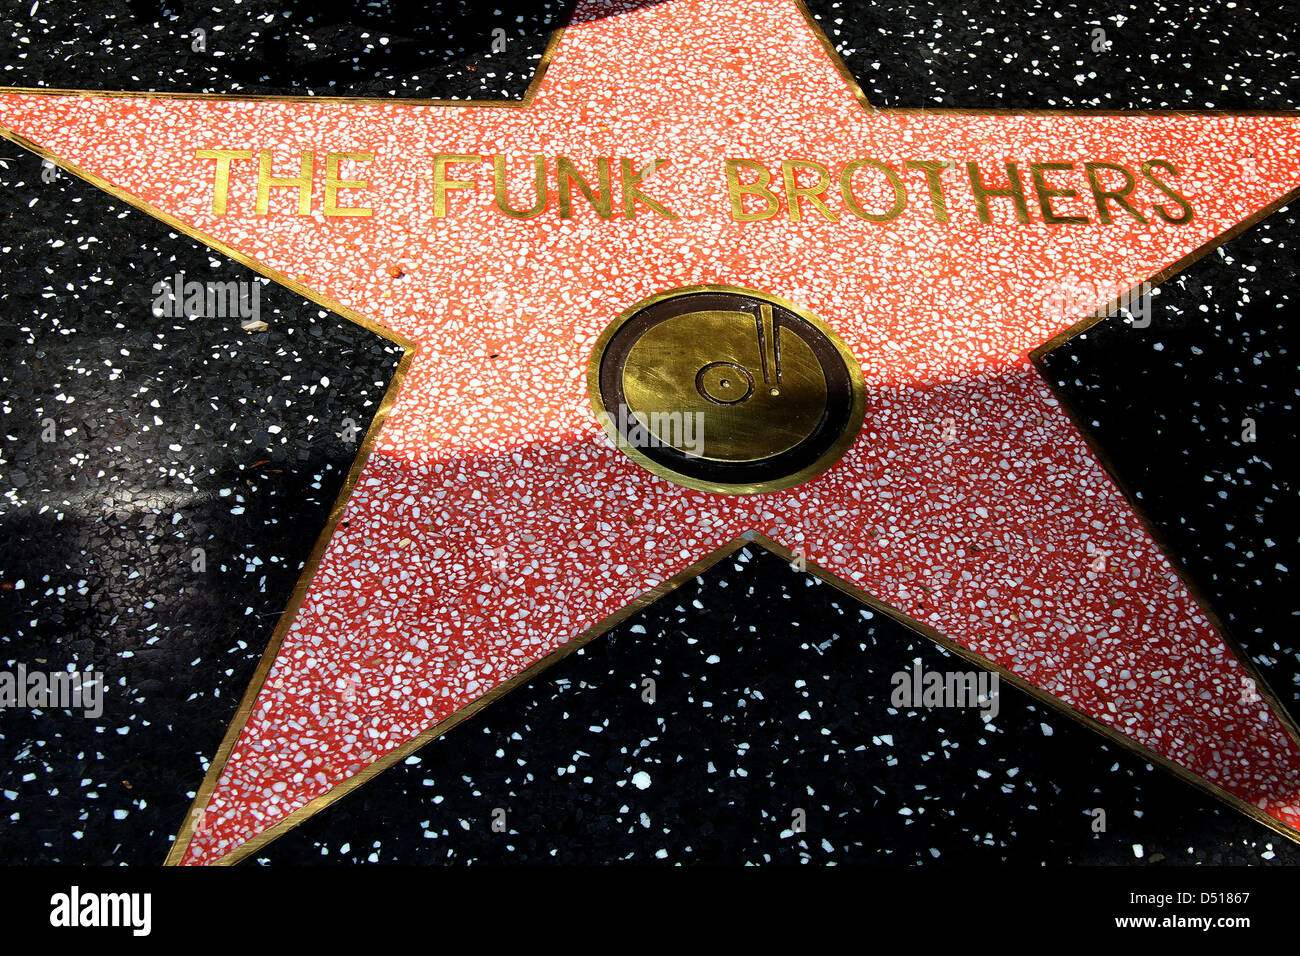 March 20, 2013 - Hollywood, California, U.S. - I15595CHW .The Funk Brothers Honored With Star On The Hollywood Walk Of Fame .7065 Hollywood Blvd, Hollywood, CA .03/21/2013 .FUNK BROTHERS STAR  . 2013(Credit Image: © Clinton Wallace/Globe Photos/ZUMAPRESS.com) Stock Photo